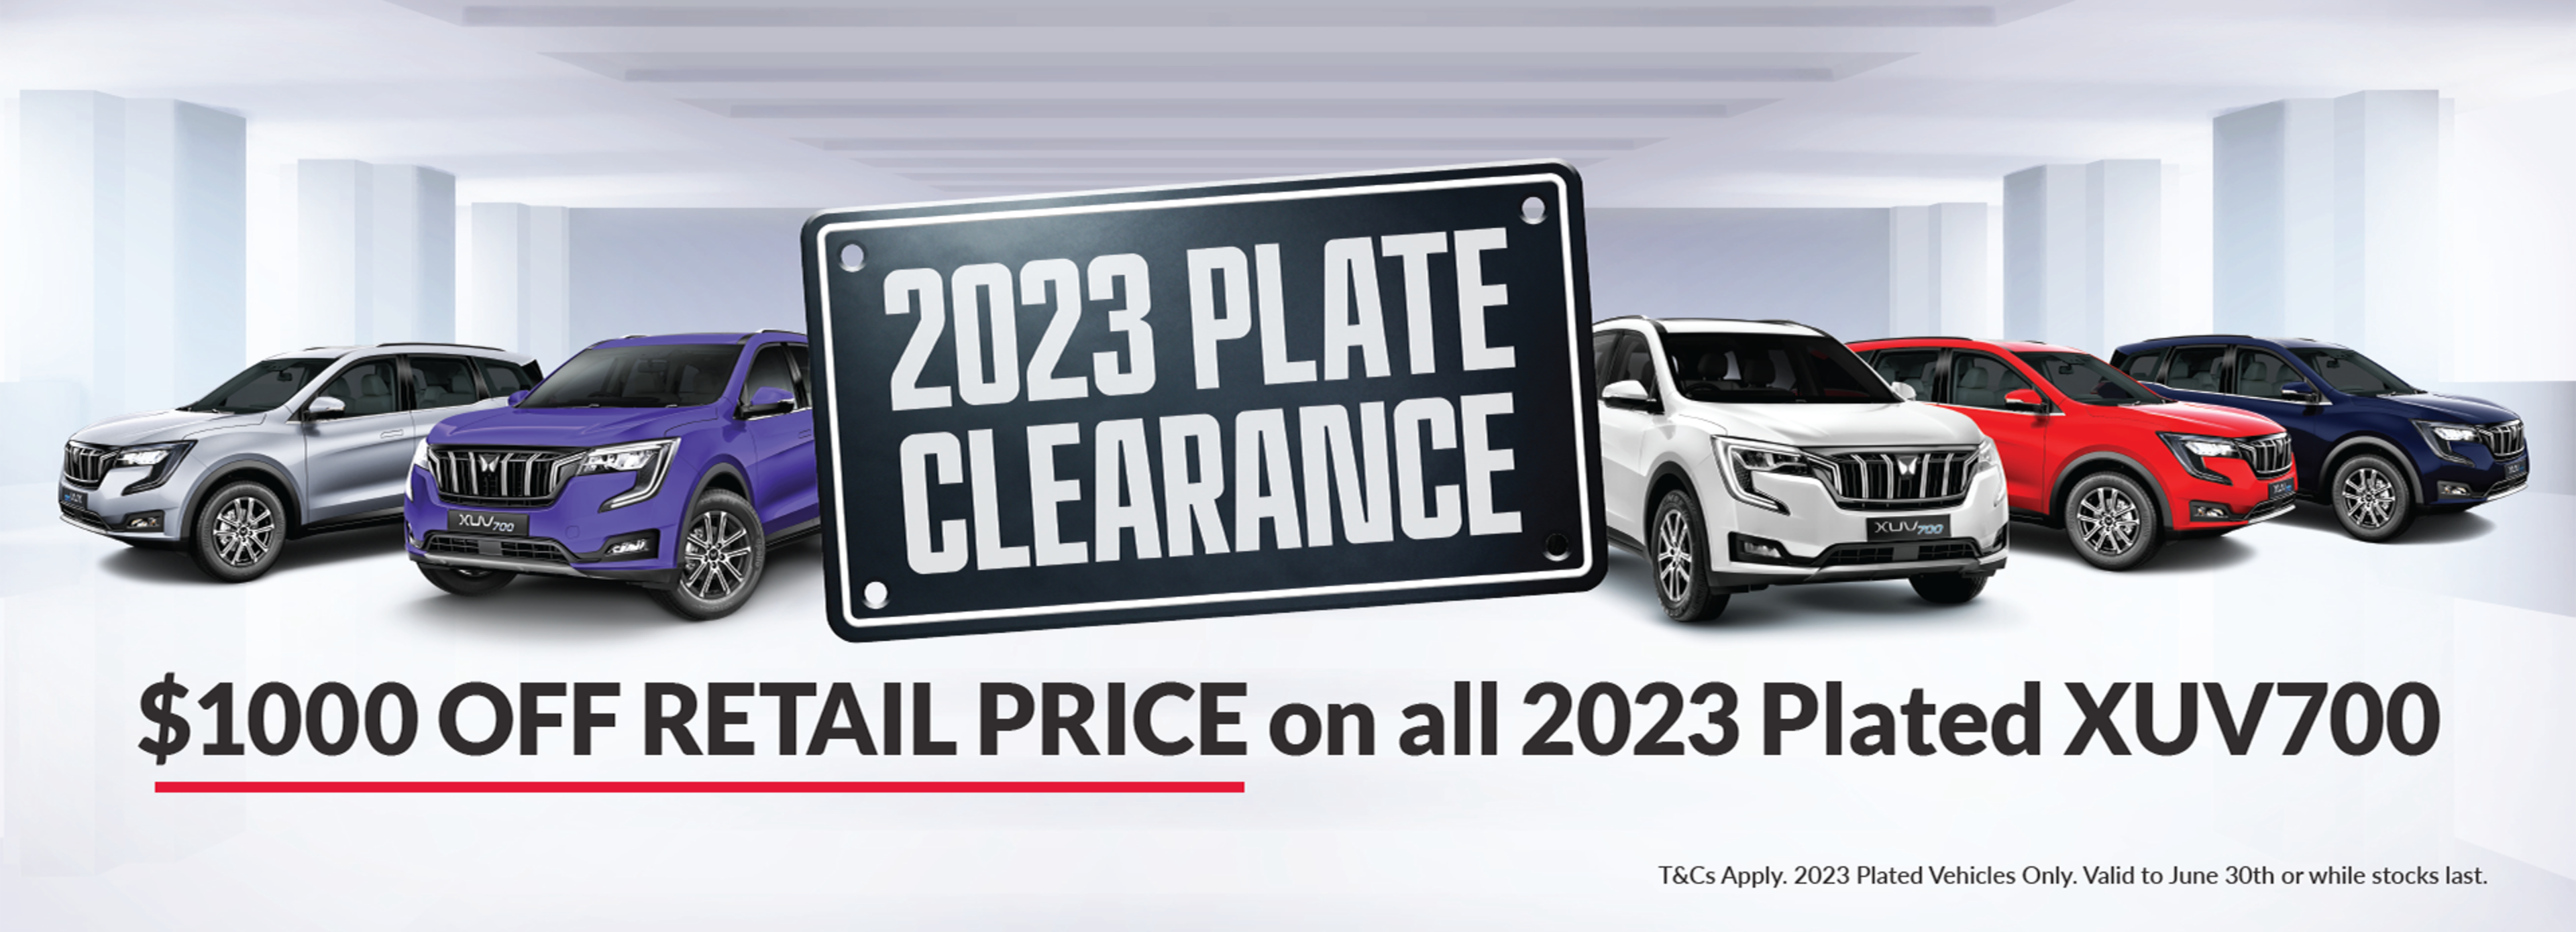 2023 Plate Clearance